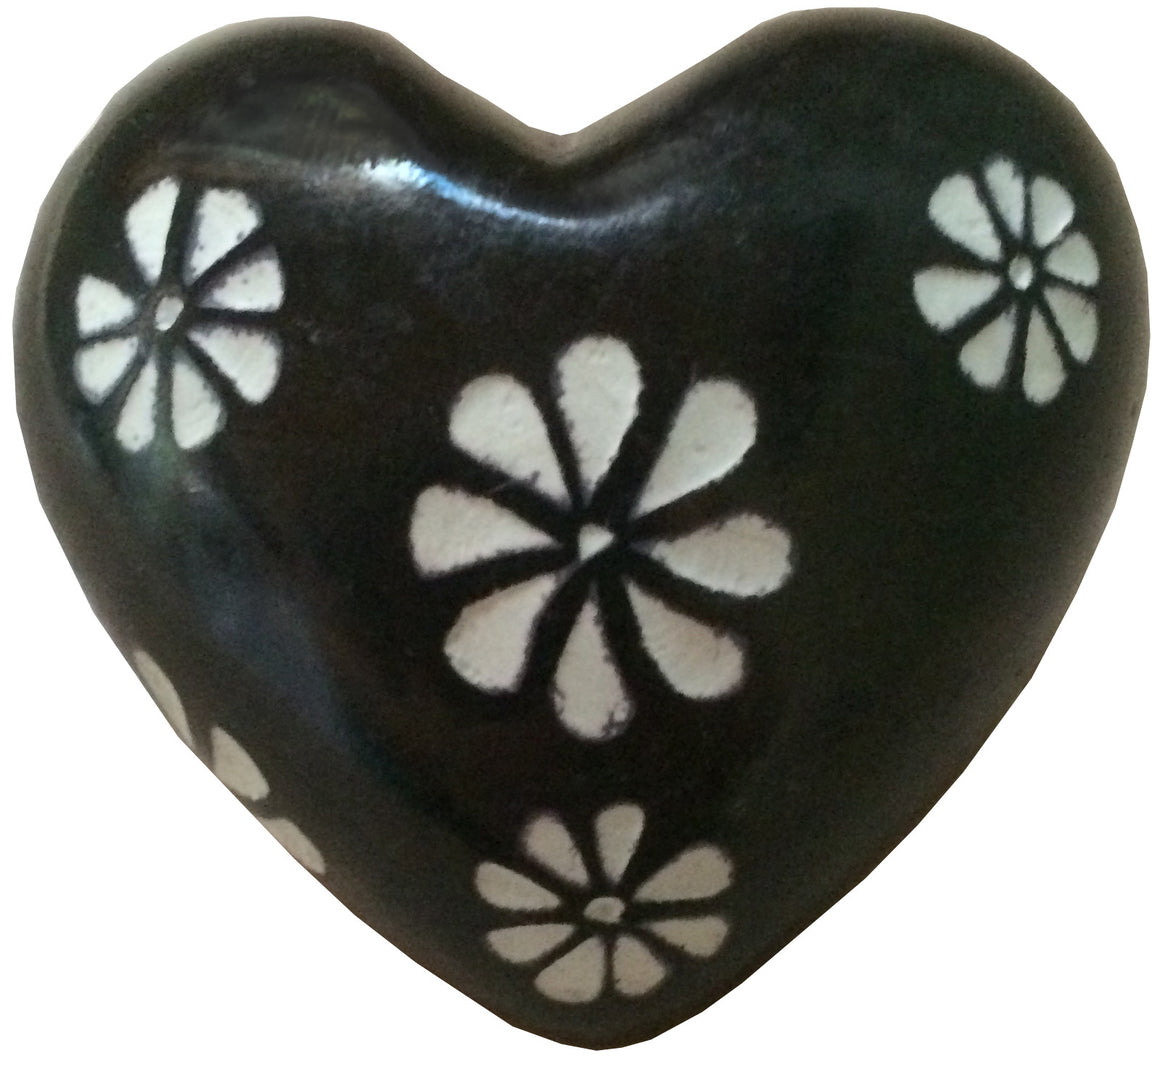 Heart-Shaped Stone Paperweights